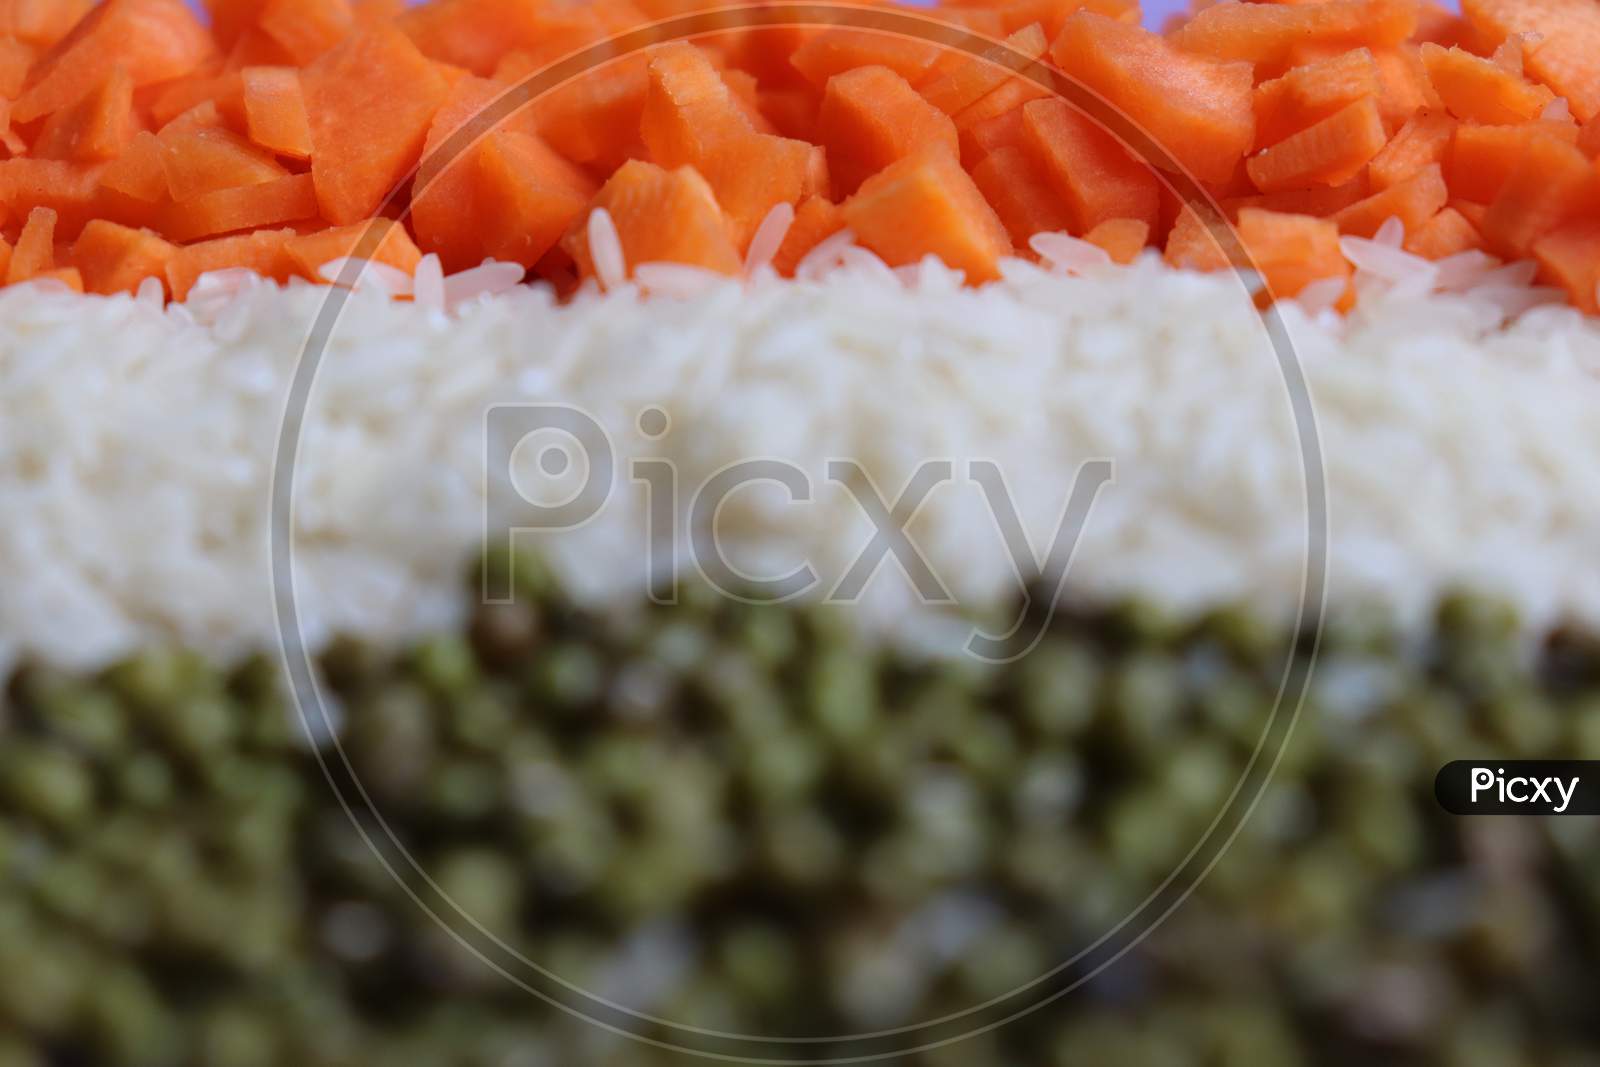 Indian independence day tri color food